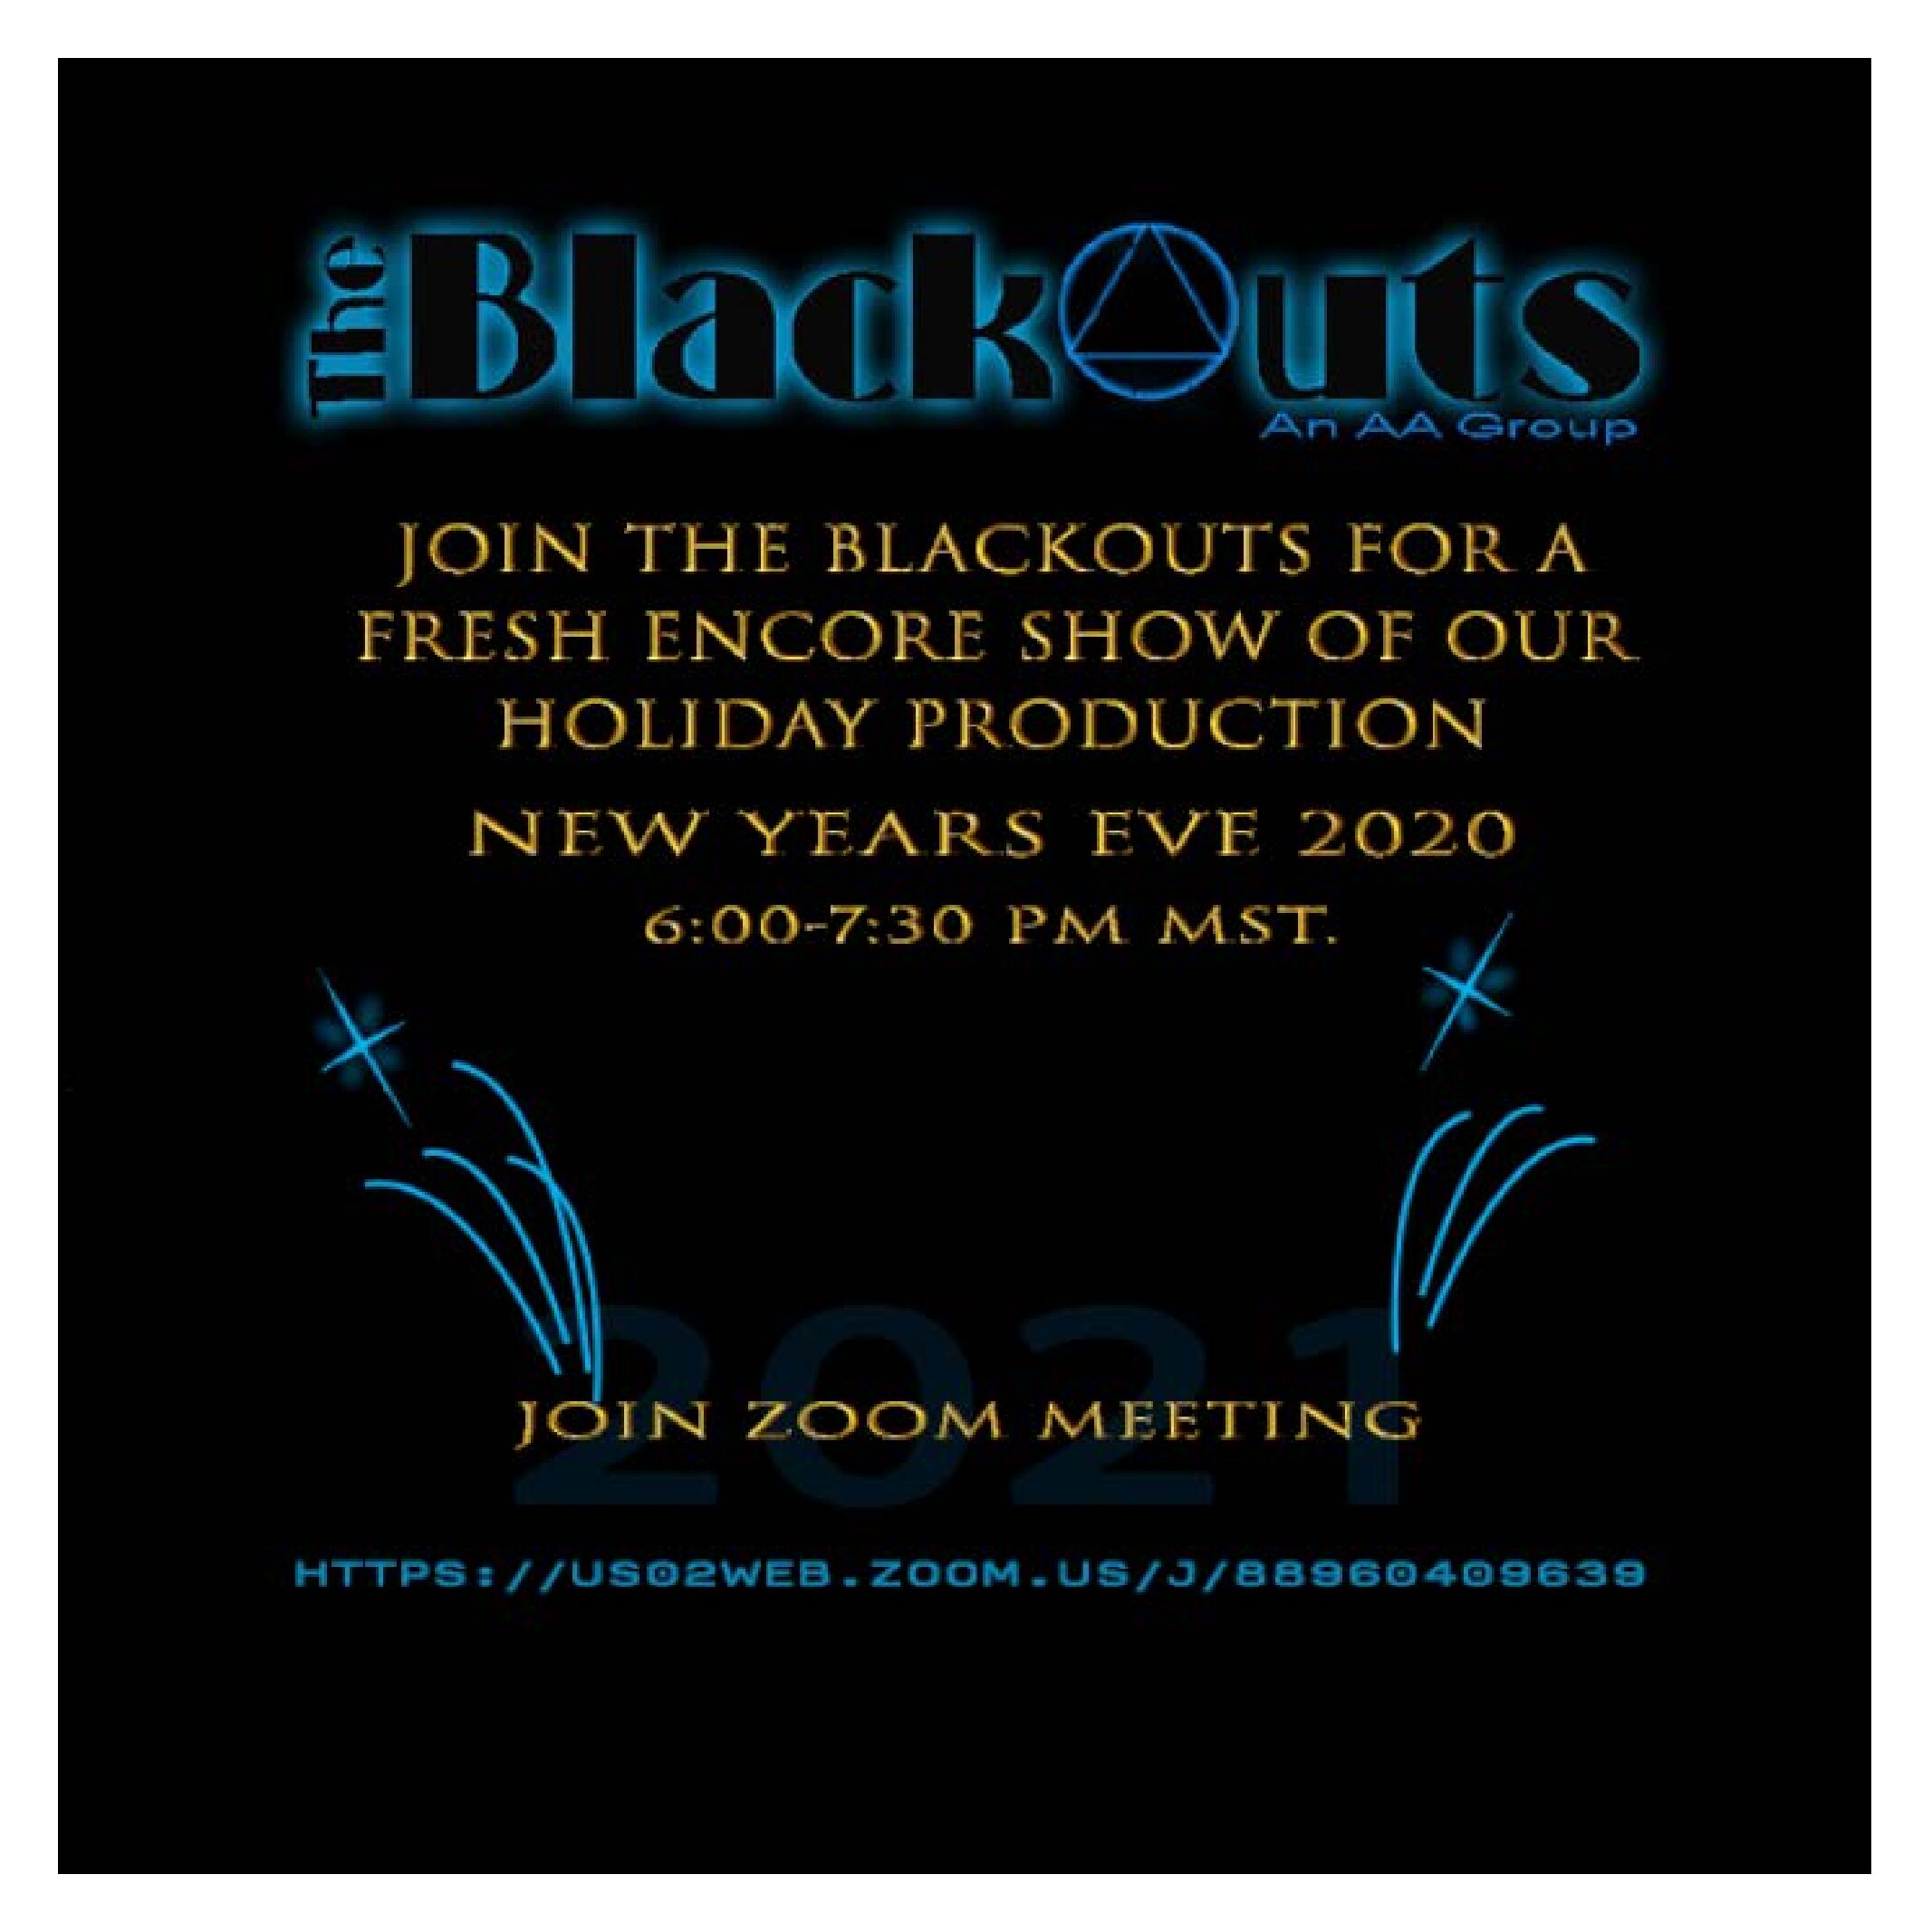 The Blackouts on New Year’s Eve!